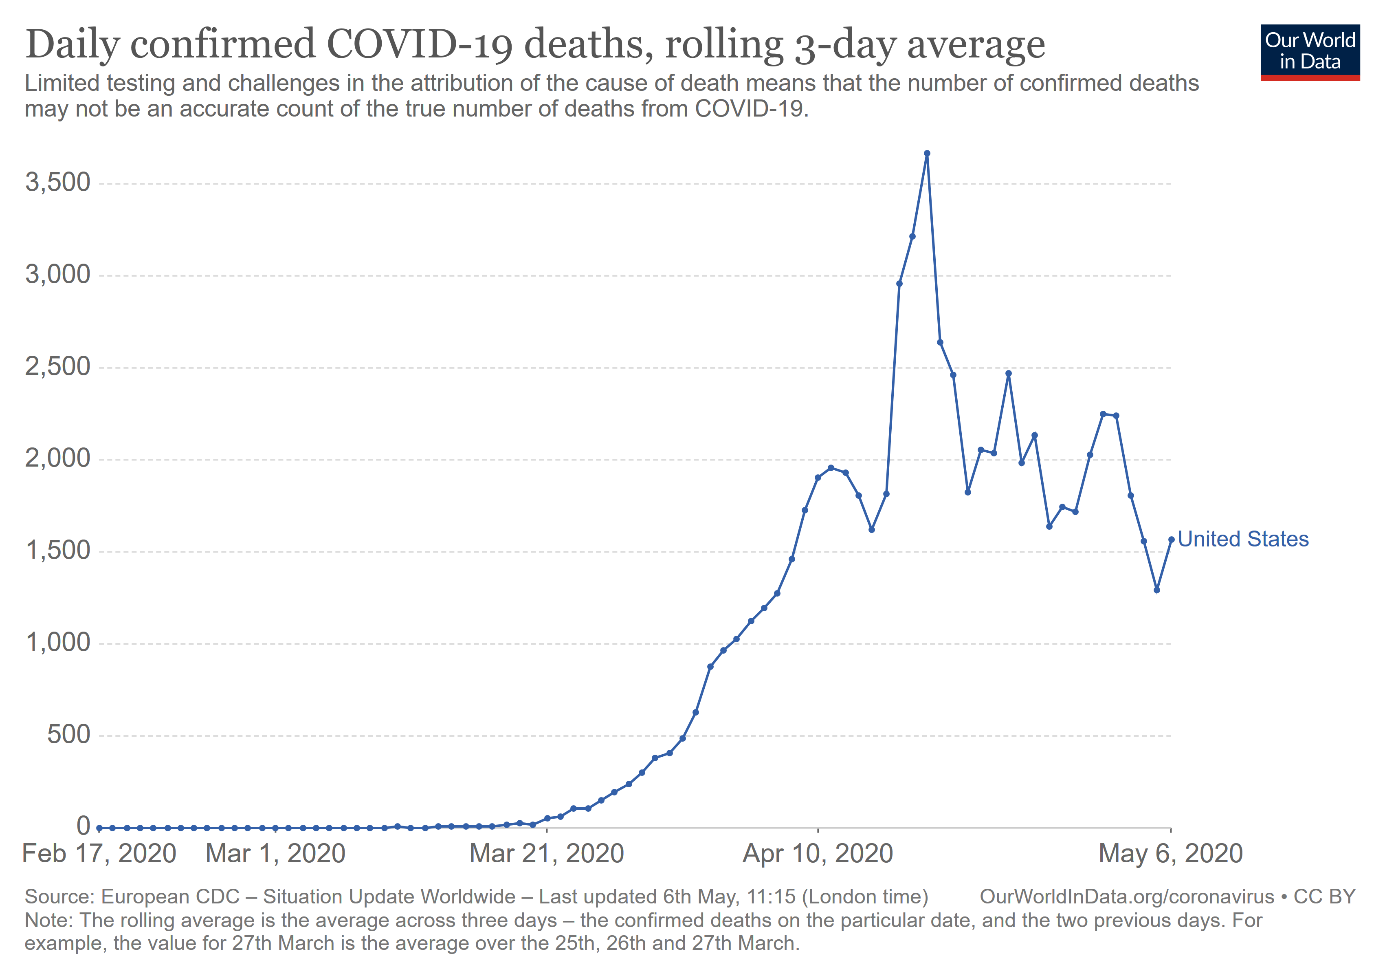 Daily confirmed COVID-19 Deaths